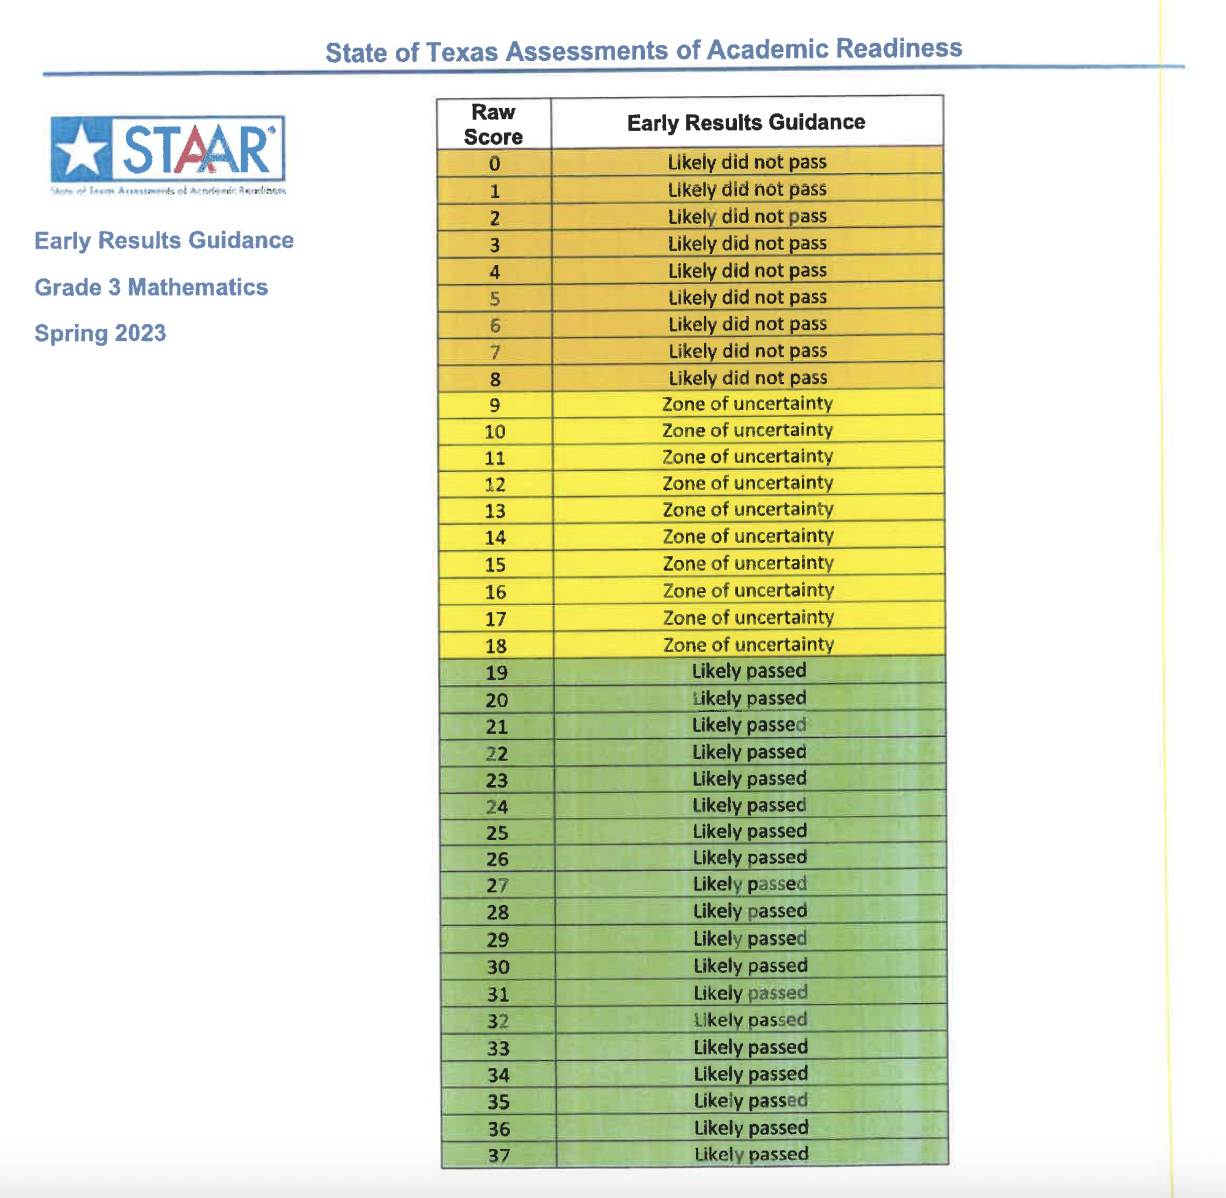 Picture of STAAR early guidance chart with colored labels of likely did not pass, zone of uncertainty, likely passed